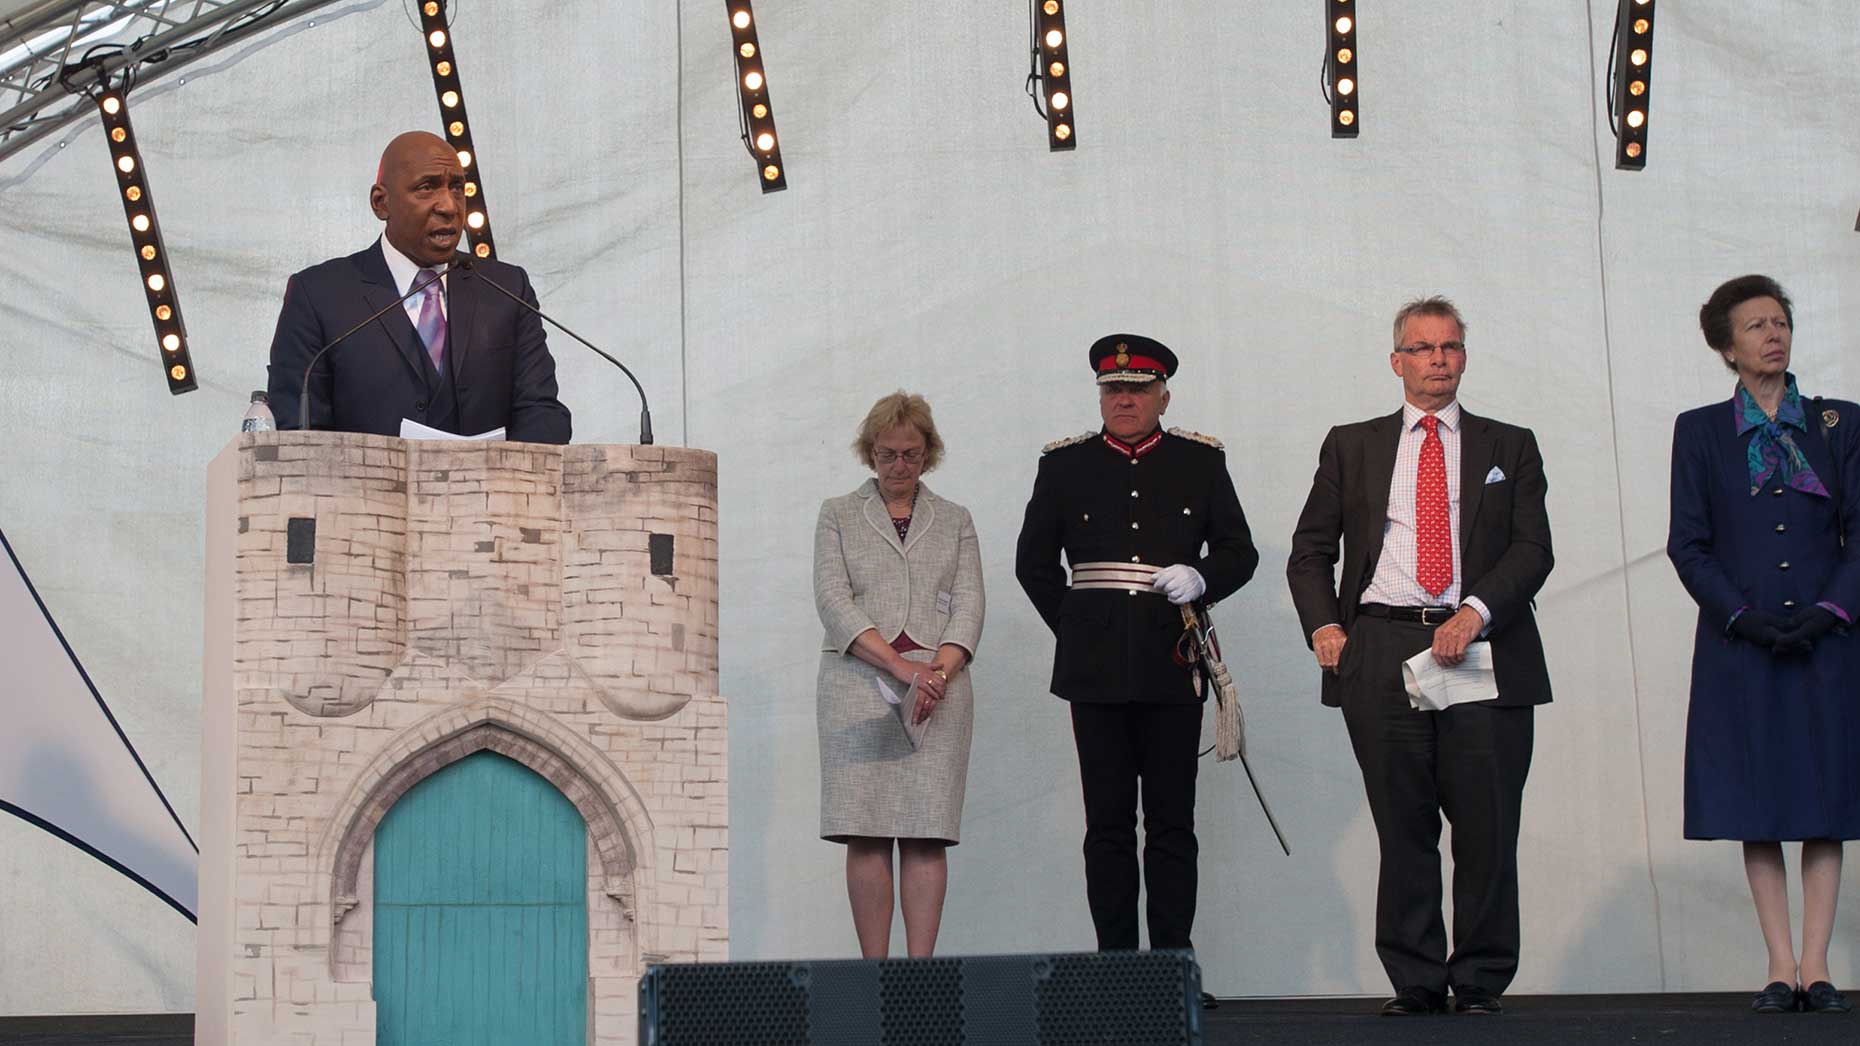 Lincolnshire actor Colin McFarlane introduced guests before the plaque was released. 